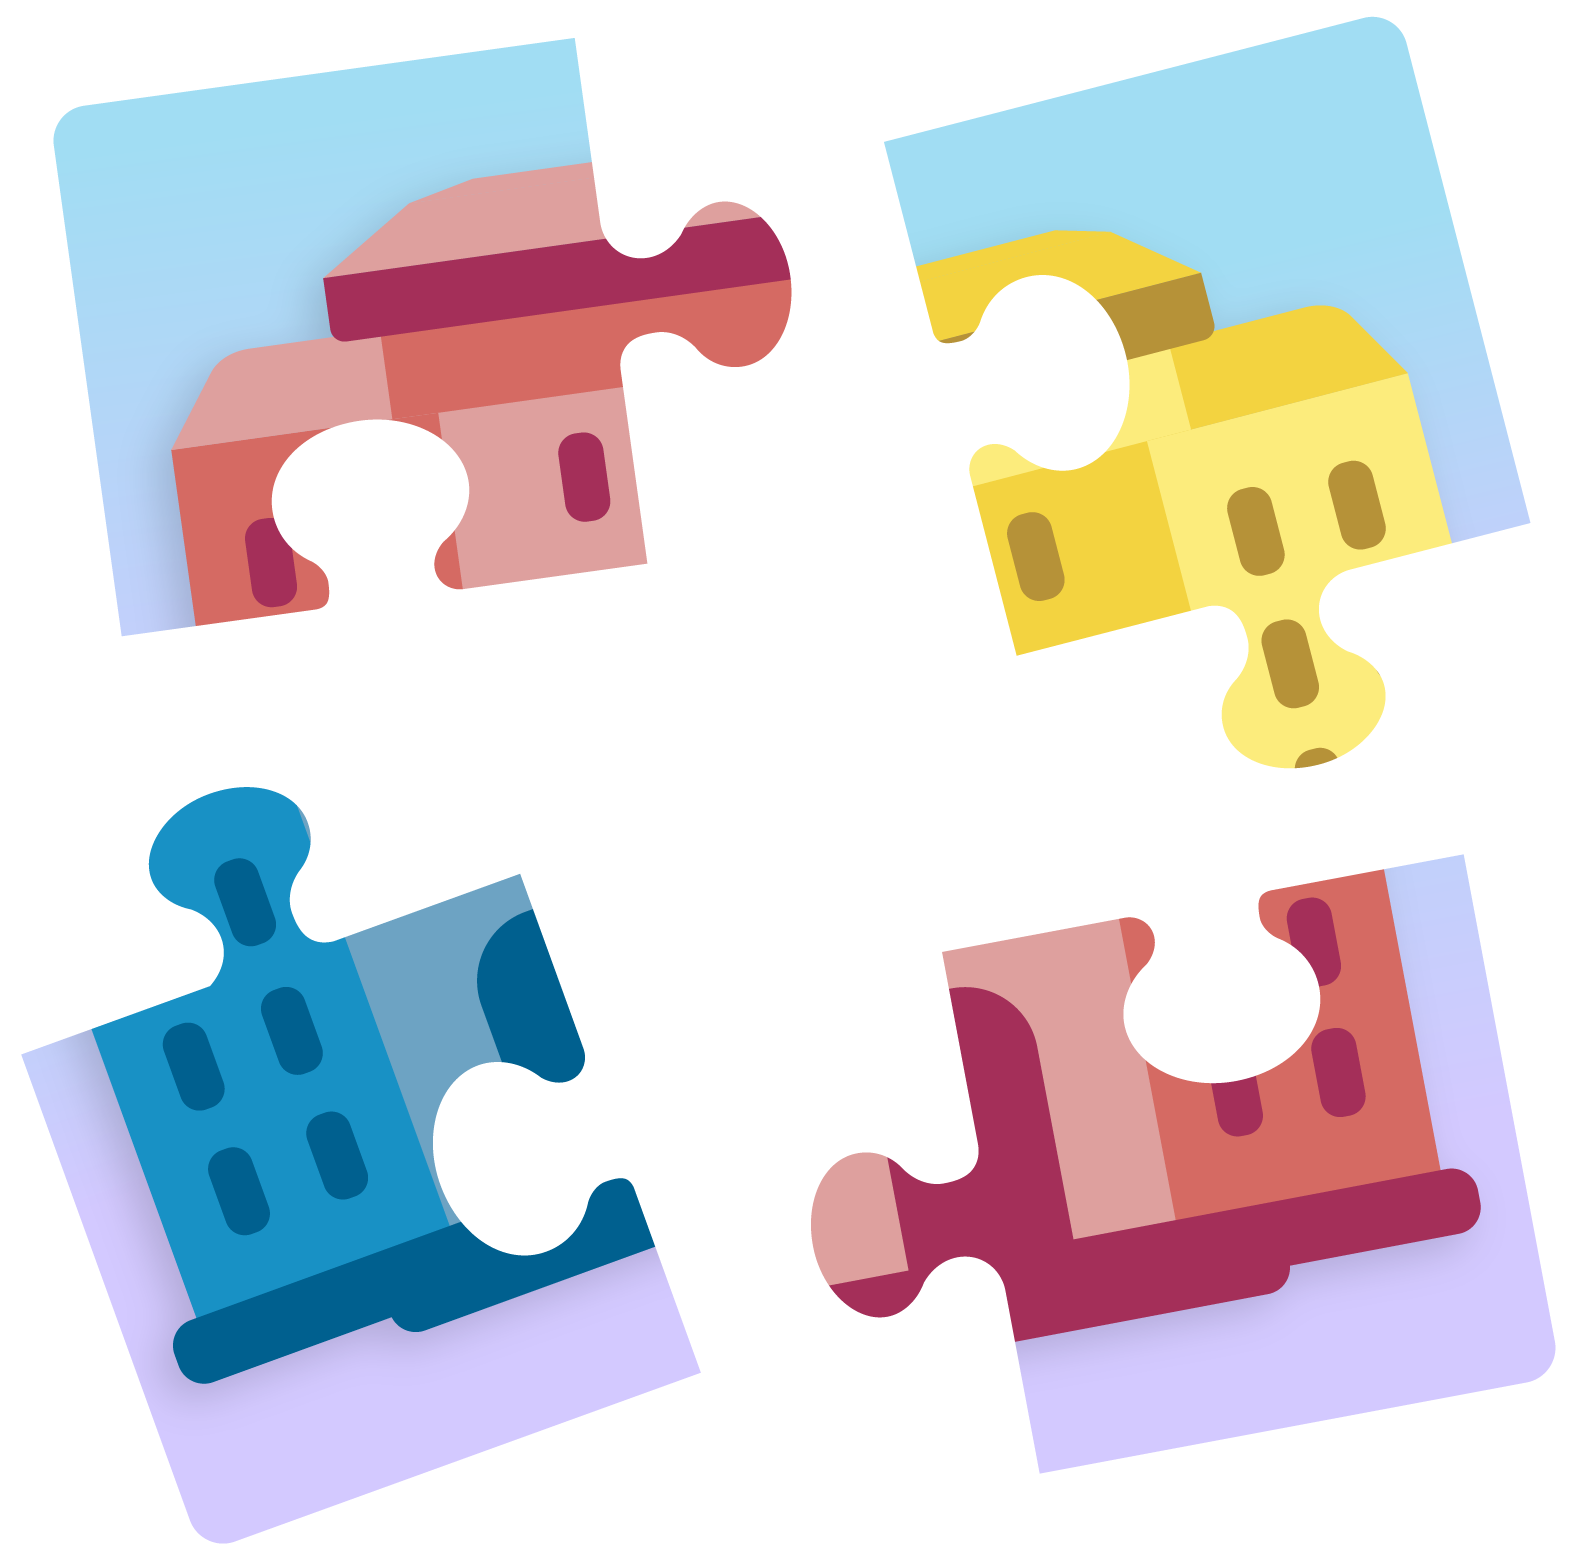 Scoir for students - illustration of 4 puzzle pieces representing finding your best college fit 